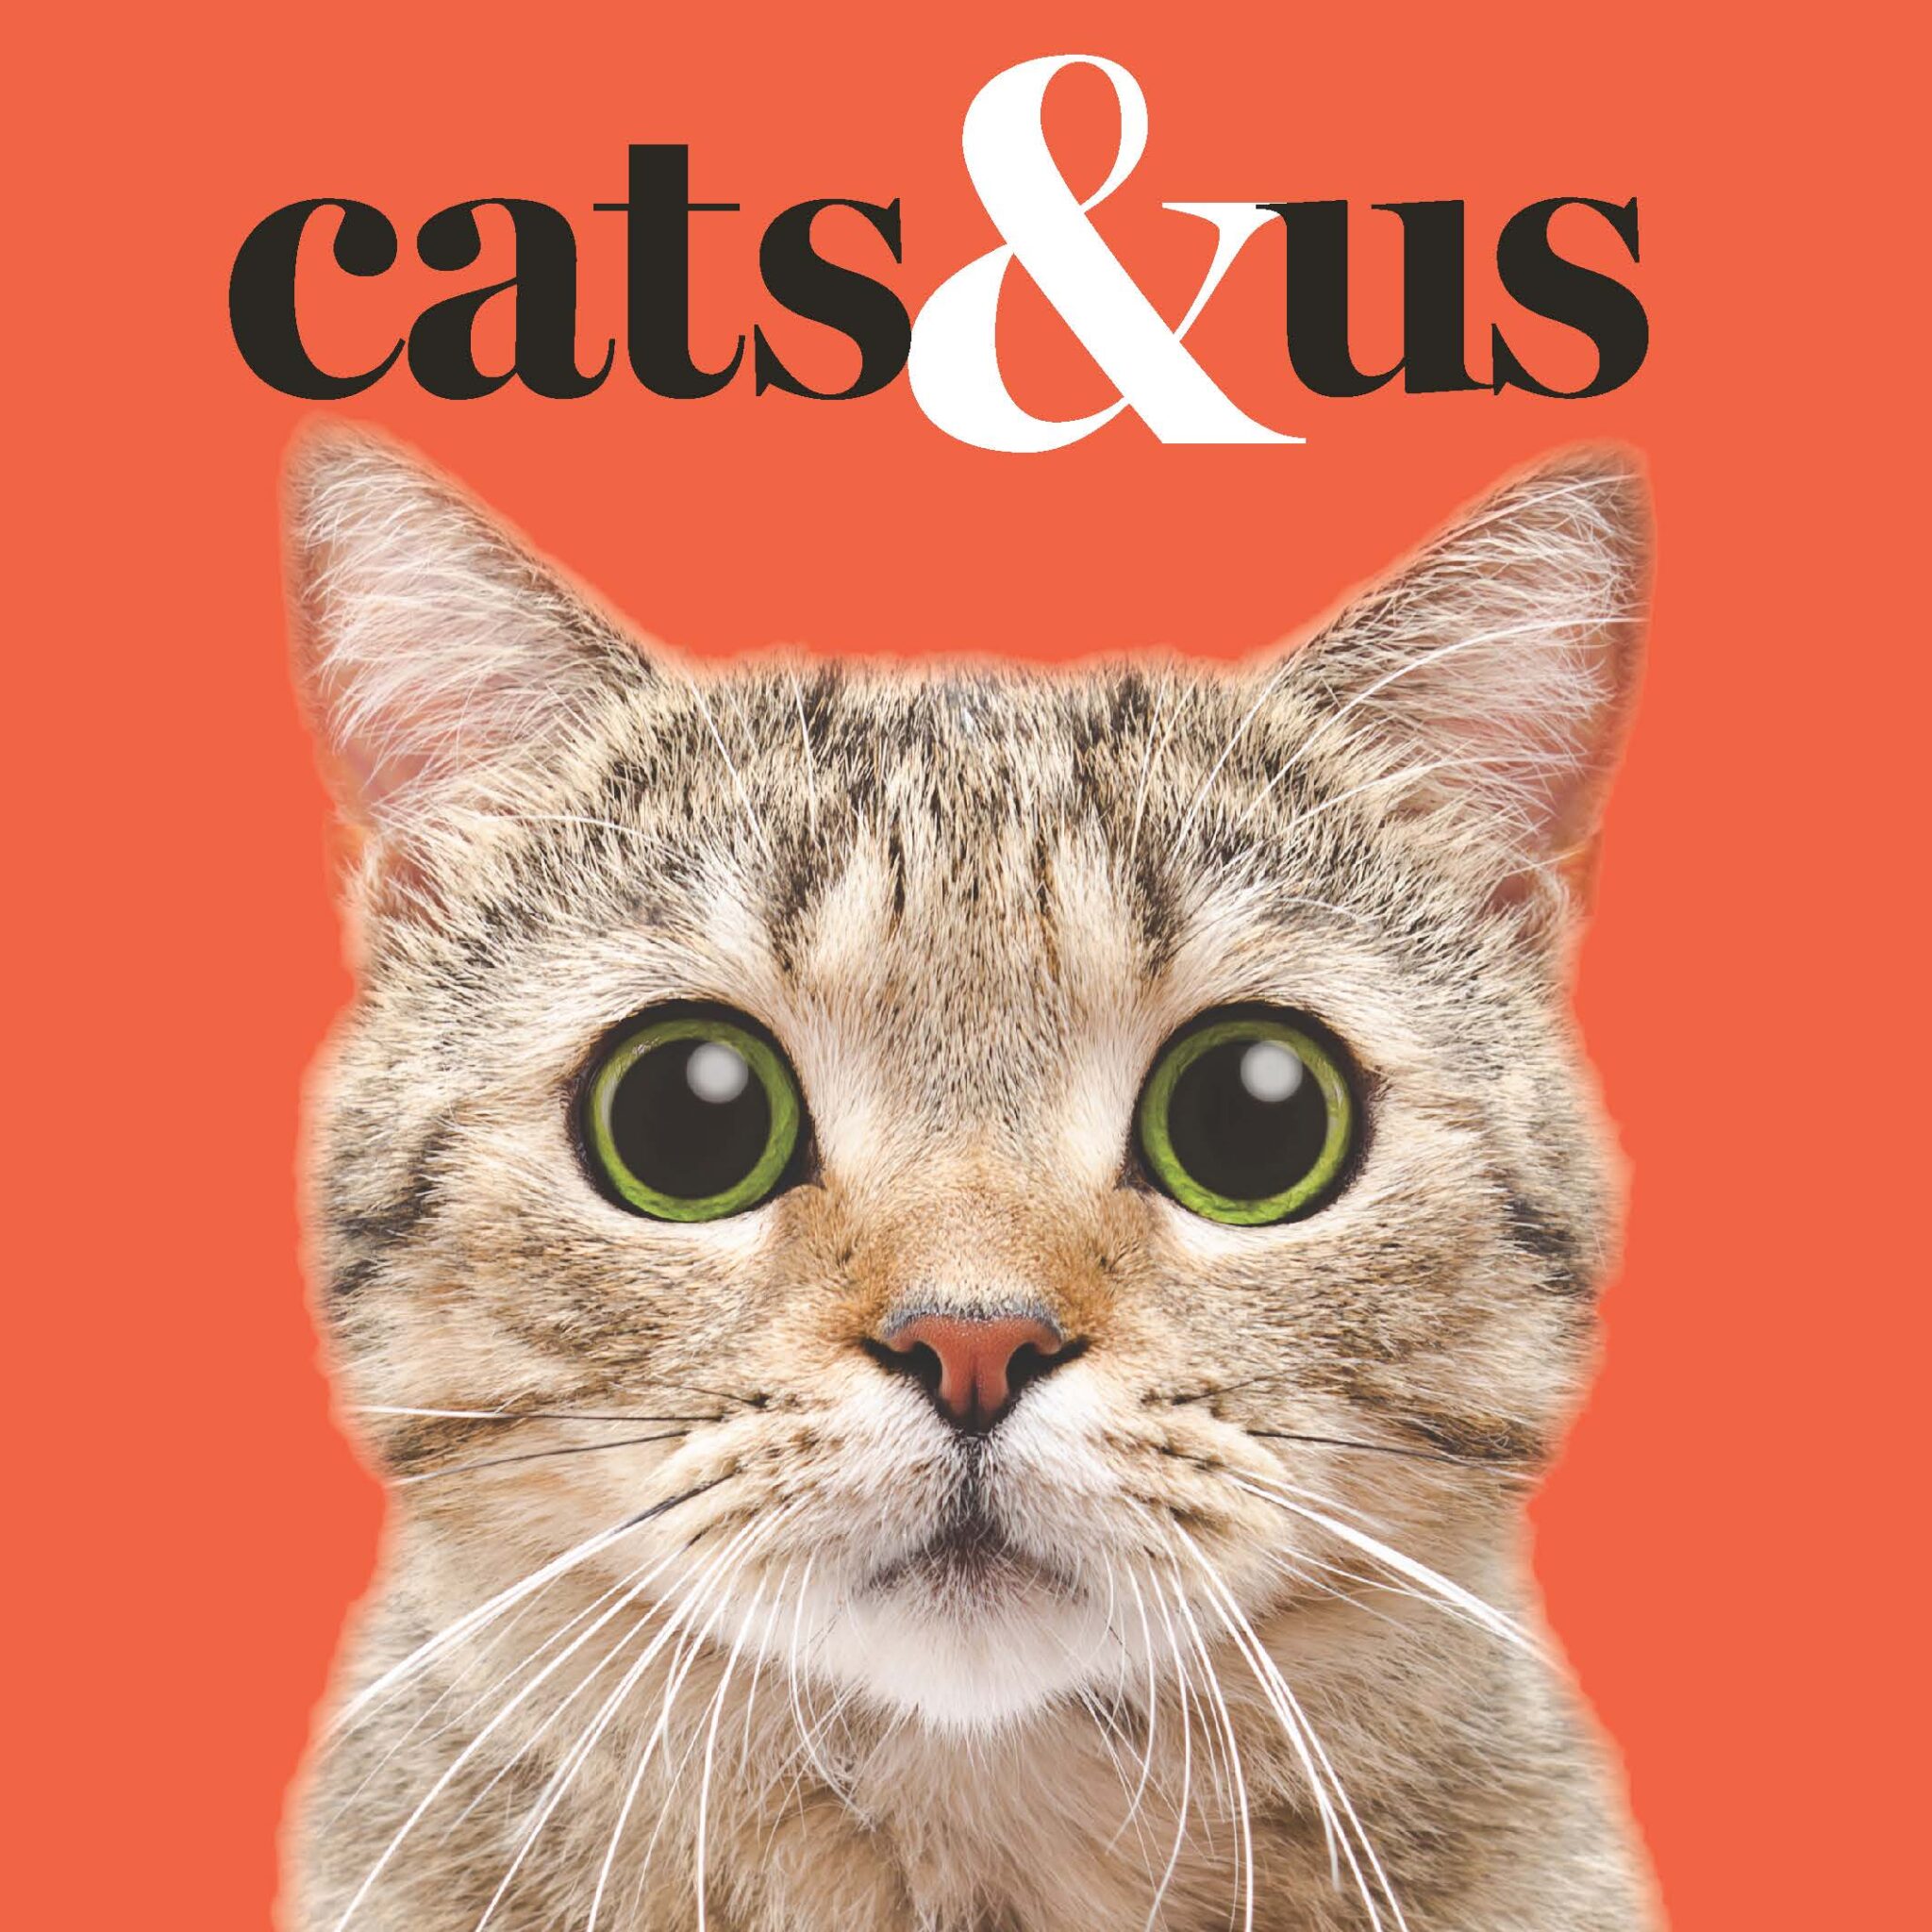 Cats and us